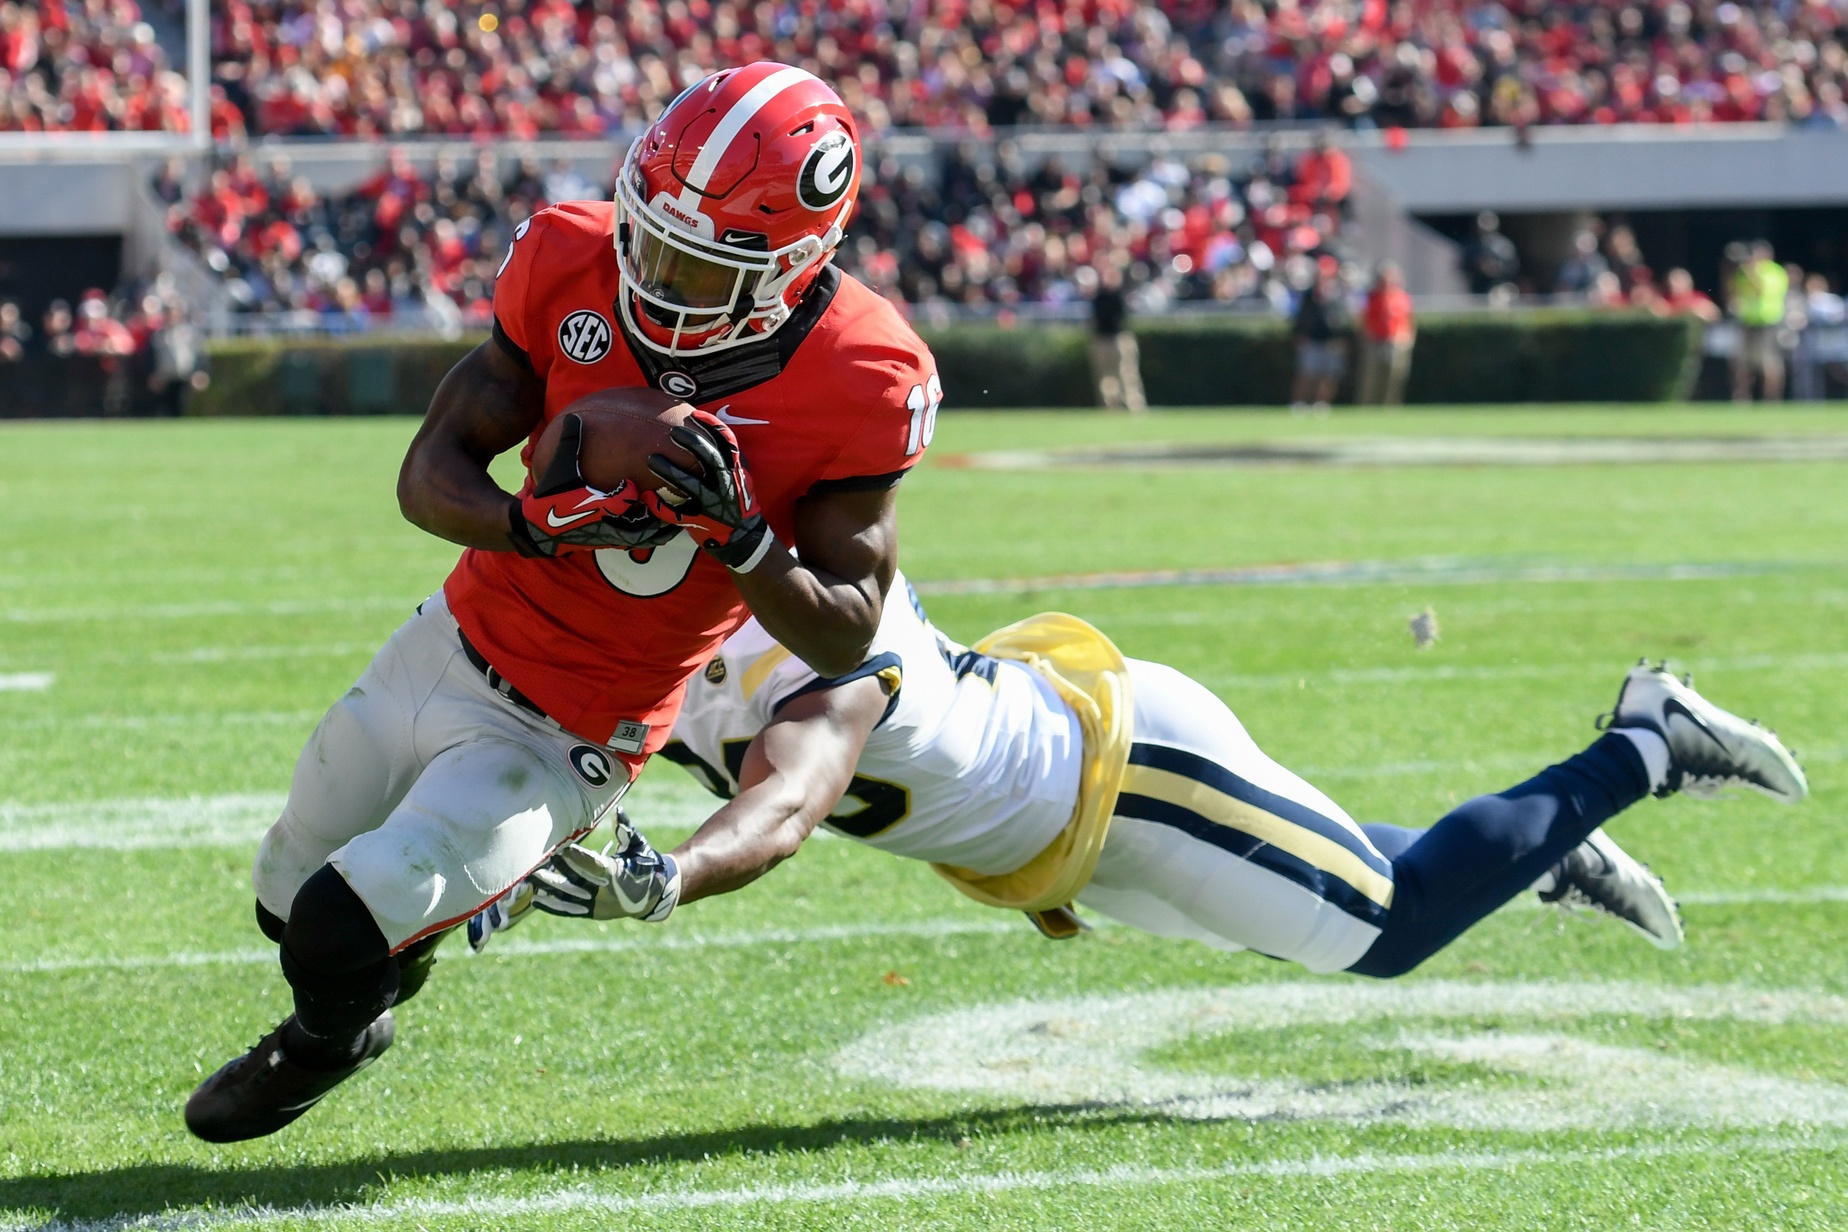 Nov 26, 2016; Athens, GA, USA; Georgia Bulldogs wide receiver Isaiah McKenzie (16) scores a touchdown against the Georgia Tech Yellow Jackets during the second quarter at Sanford Stadium. Mandatory Credit: Dale Zanine-USA TODAY Sports